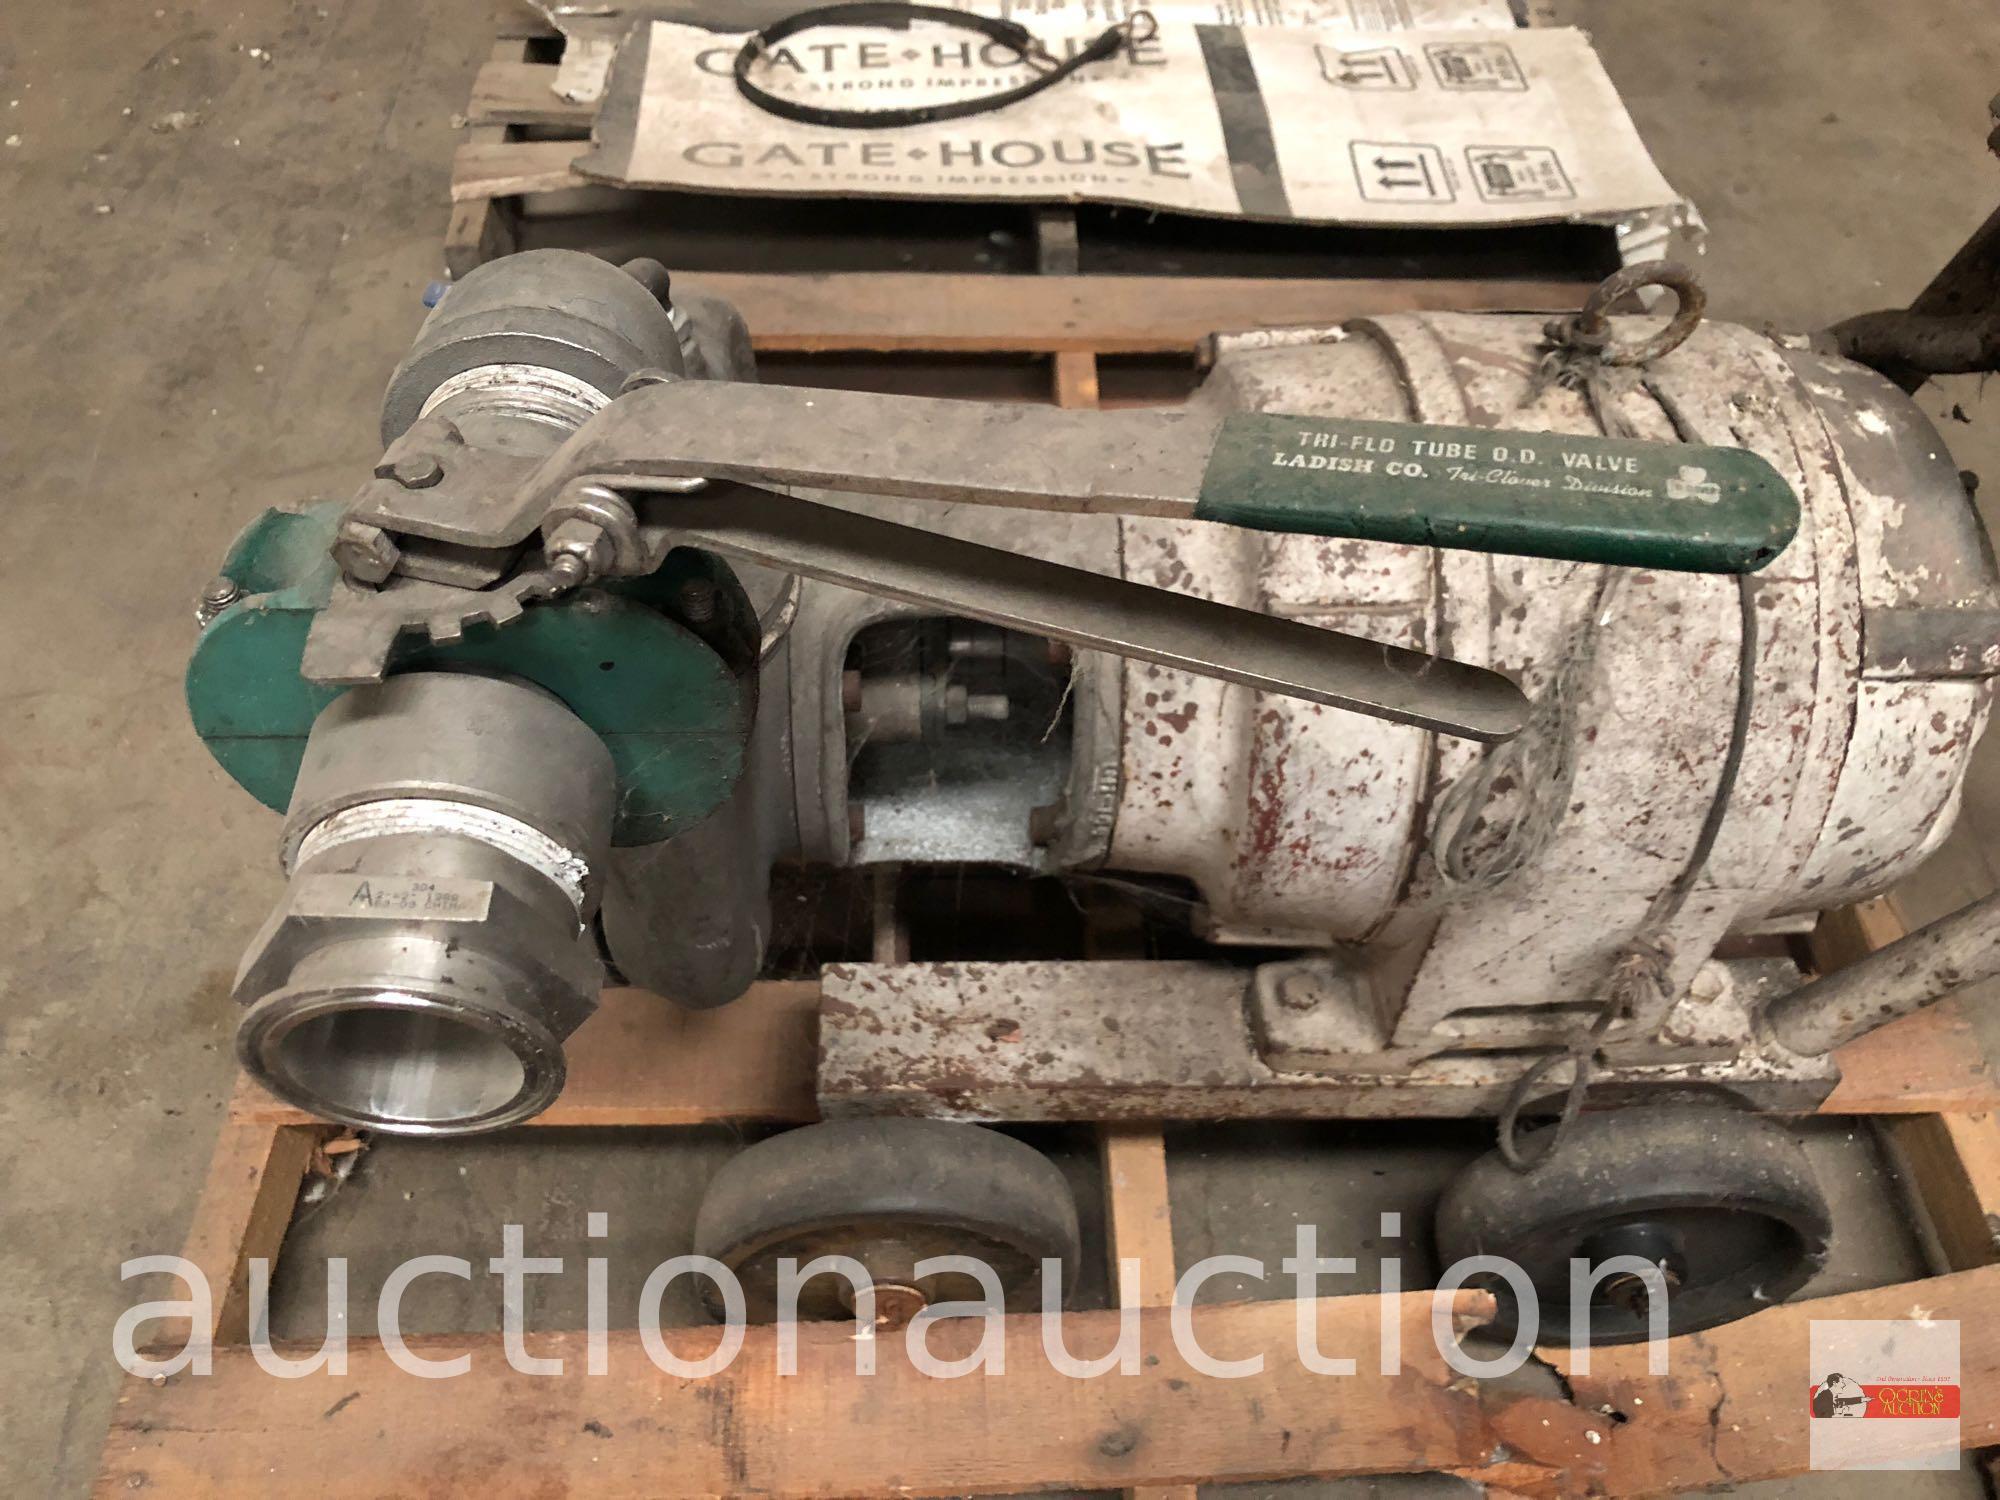 Machinery - Lg. portable Irrigation pump, electric, Valley Foundry & Machine Works